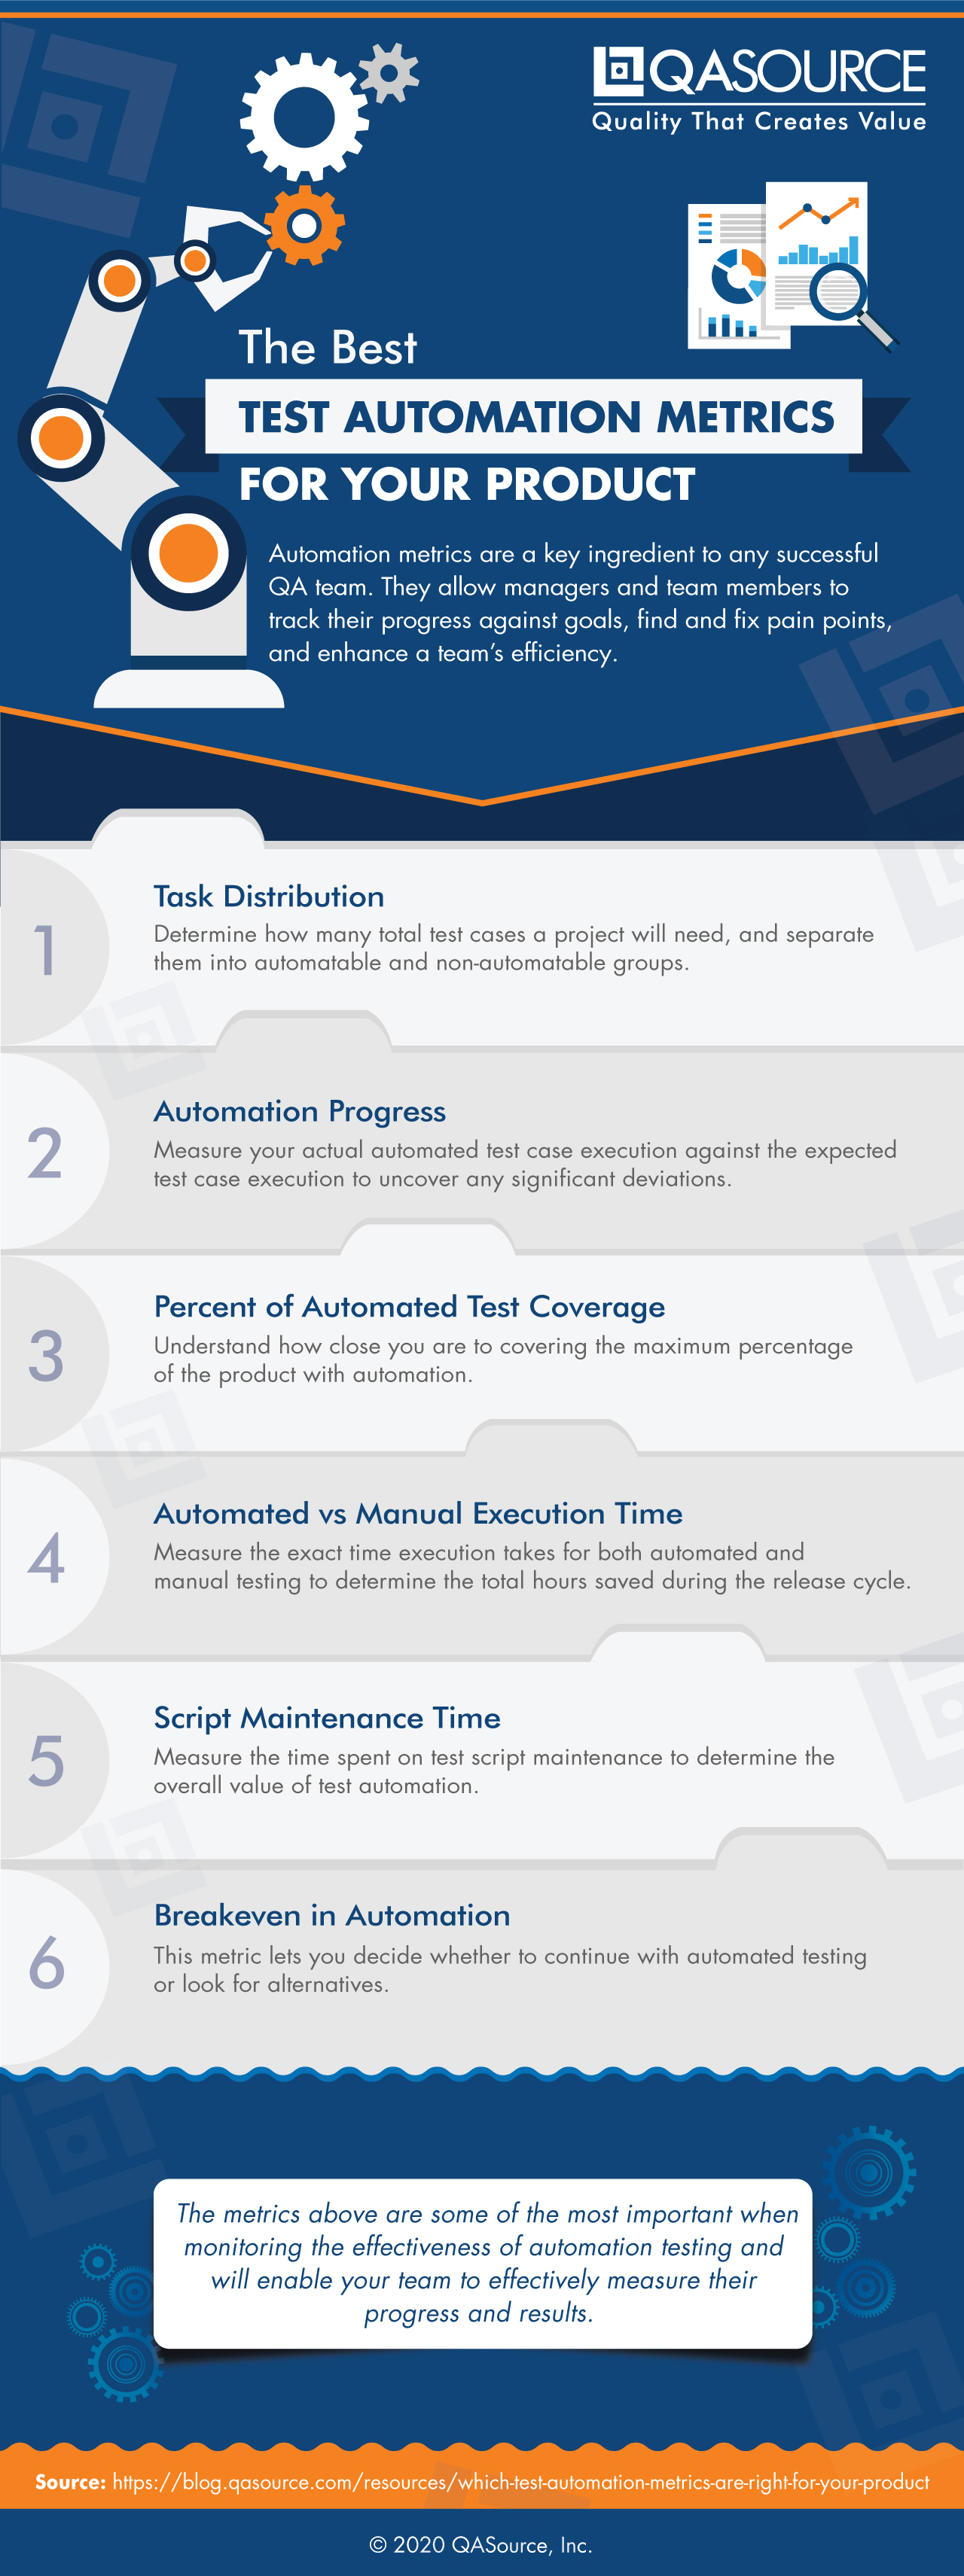 The Best Test Automation Metrics For Your Product (Infographic)